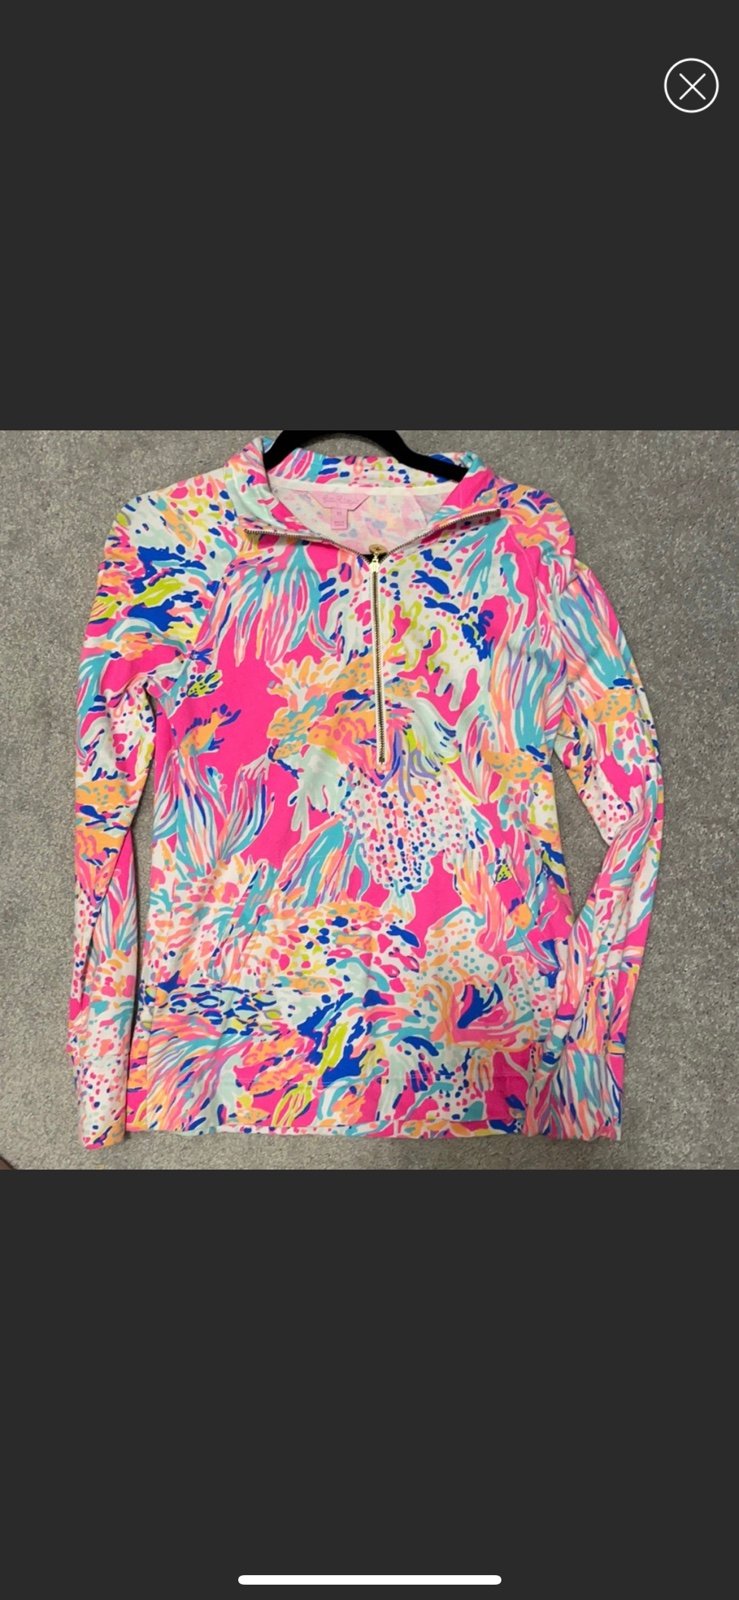 high discount Lilly Pulitzer popover IUWcZDkfk well sal